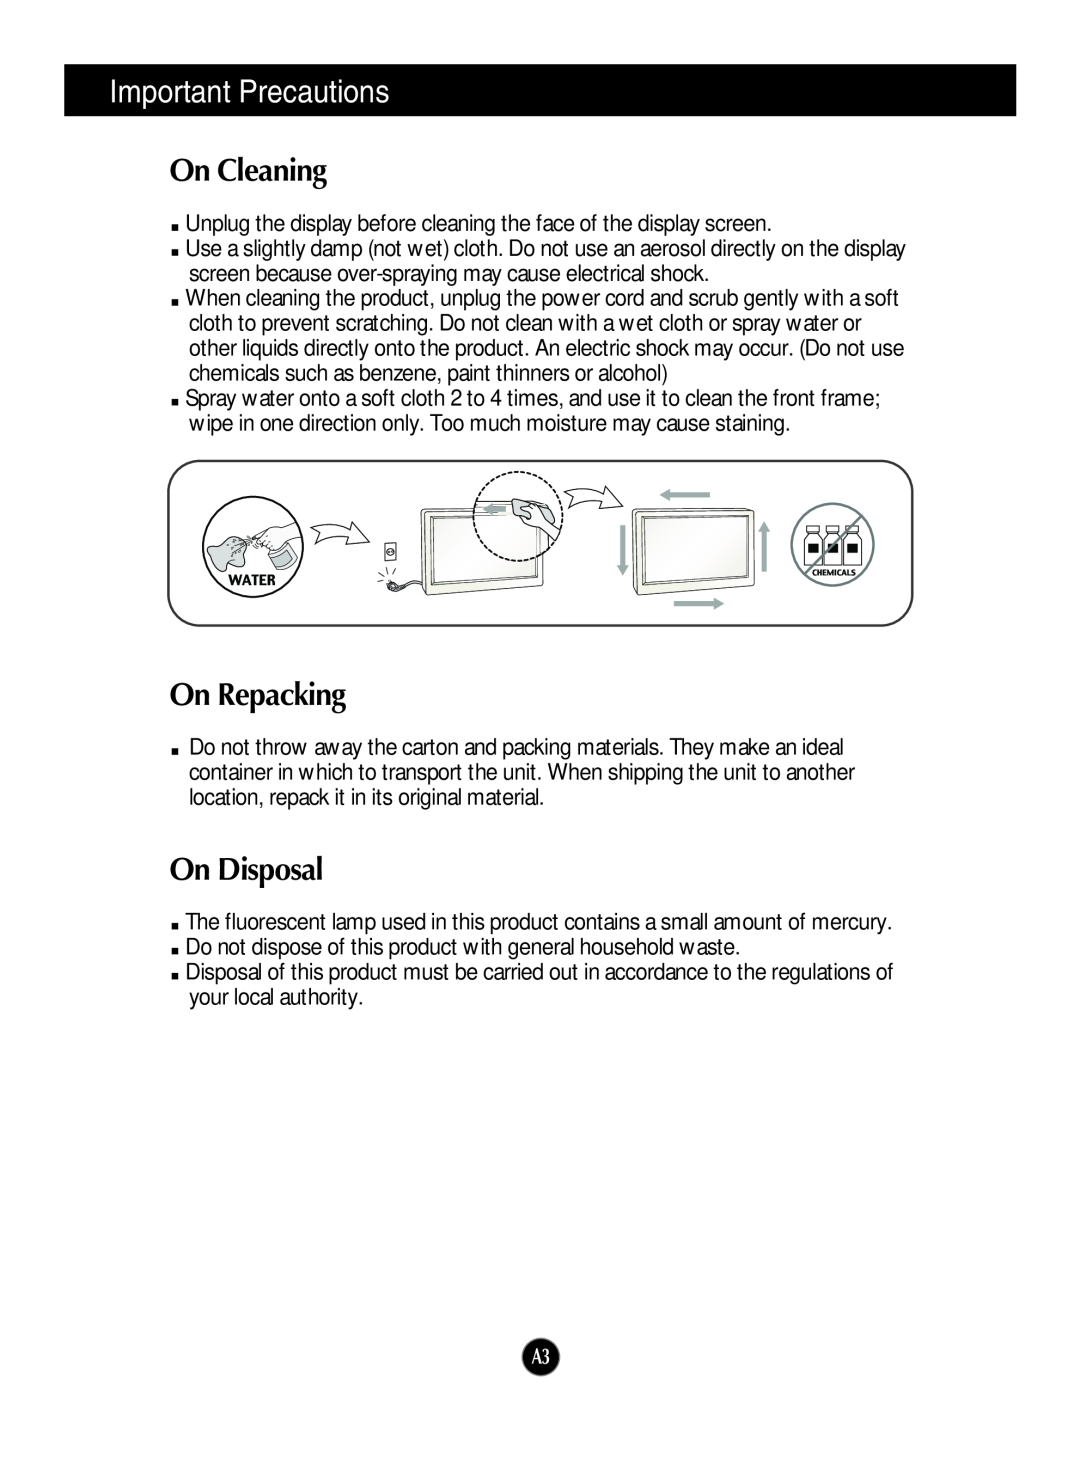 LG Electronics W2243T, W2043T, W2343T manual On Cleaning, On Repacking, On Disposal, Important Precautions 